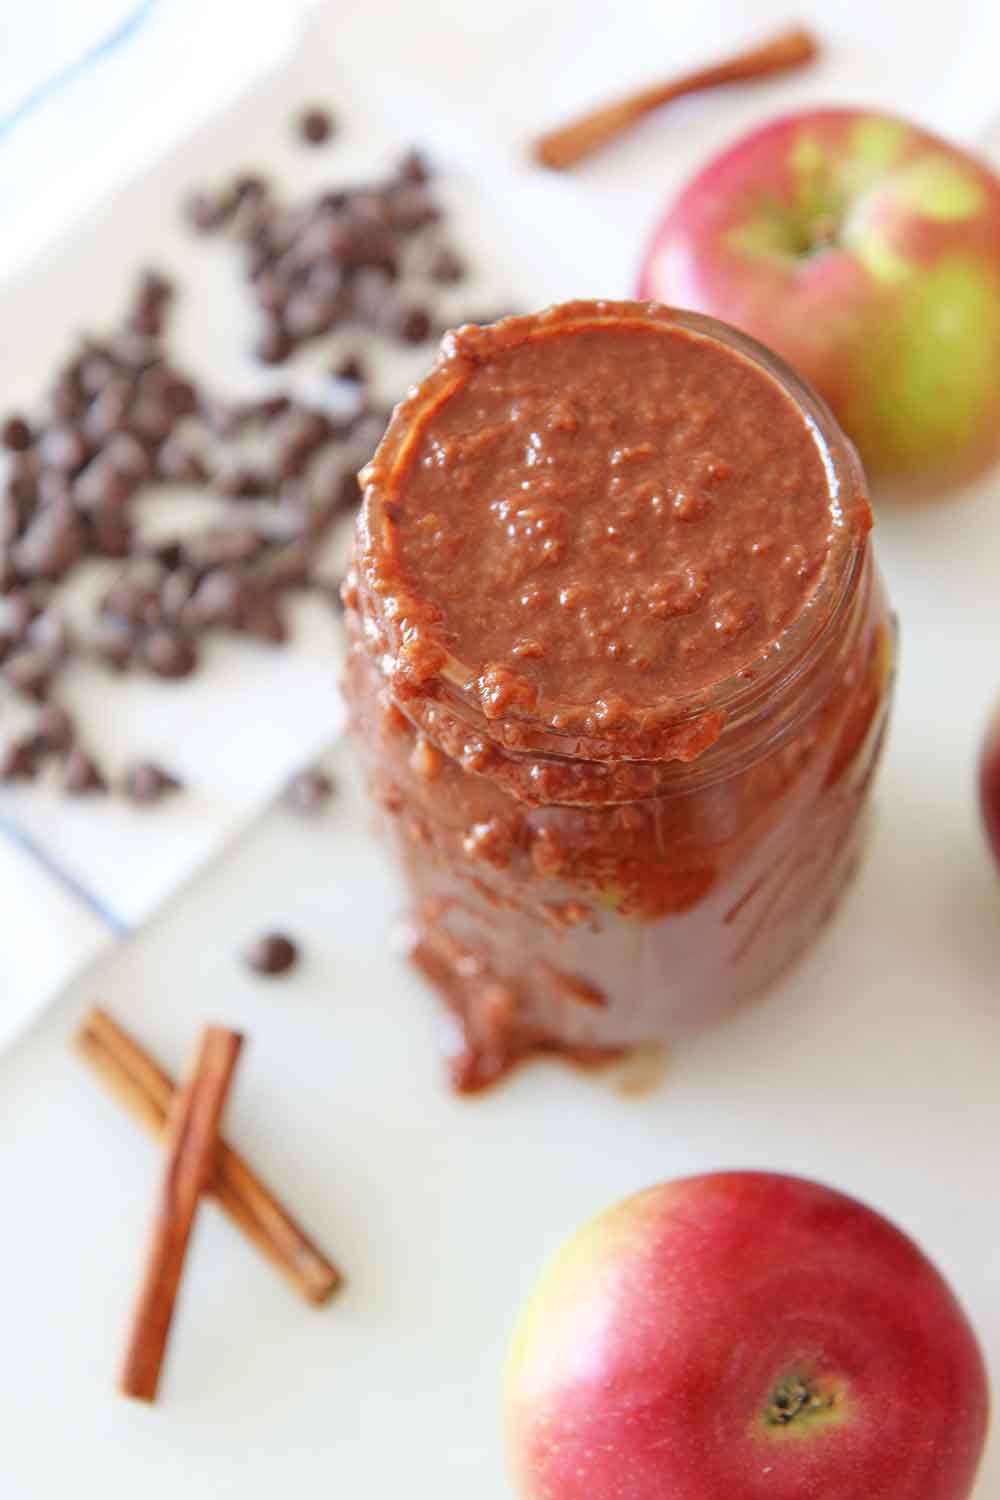 How to Make Chocolate Applesauce in a Slow Cooker